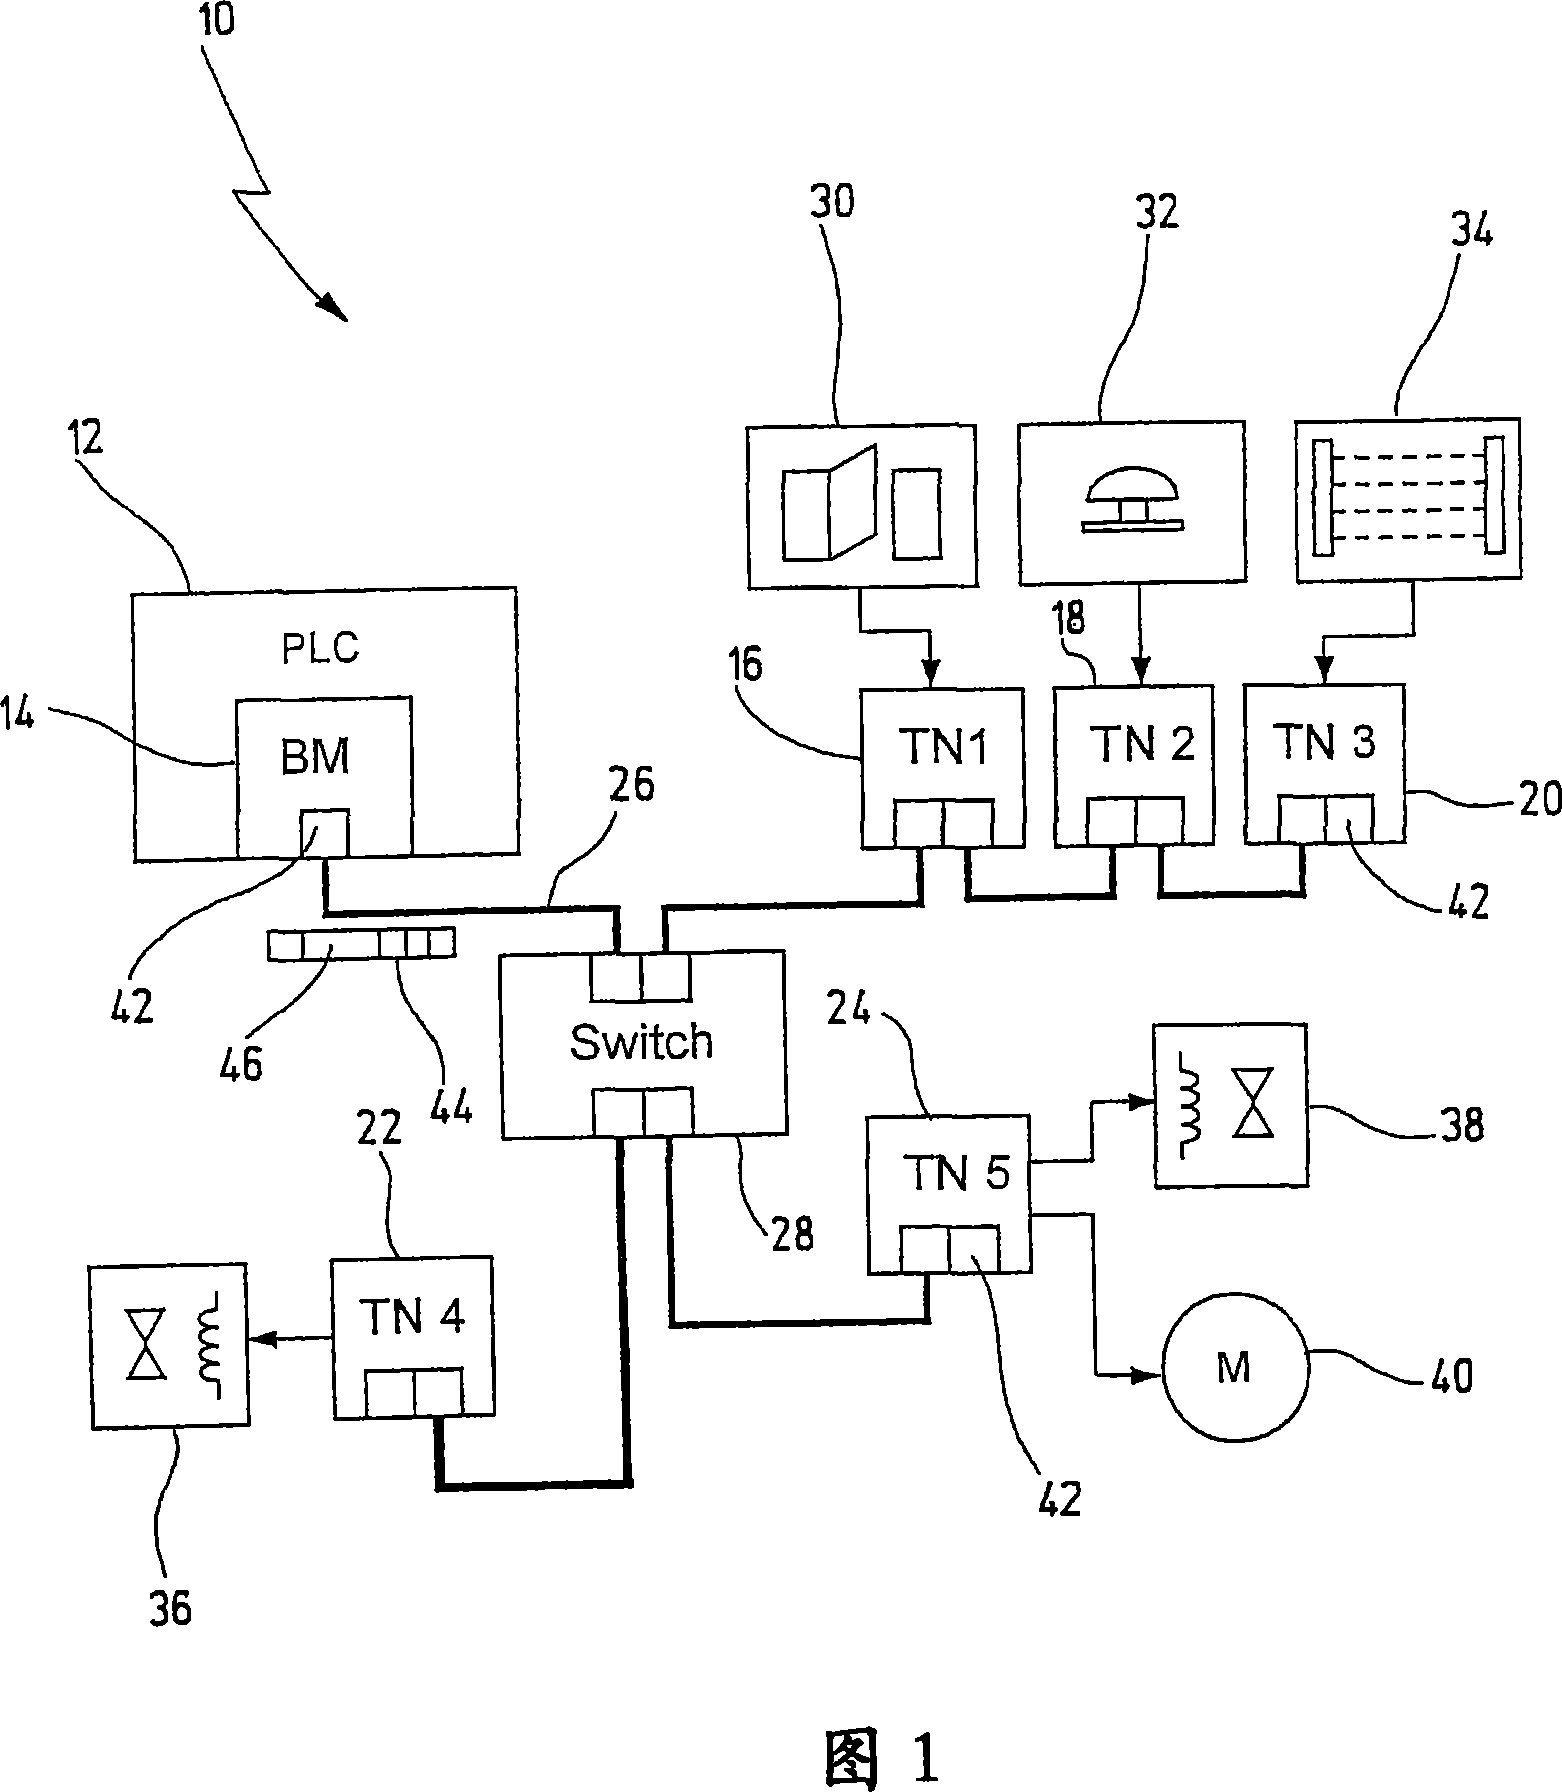 Control system having a plurality of spatially distributed stations, and method for transmitting data in such a control system